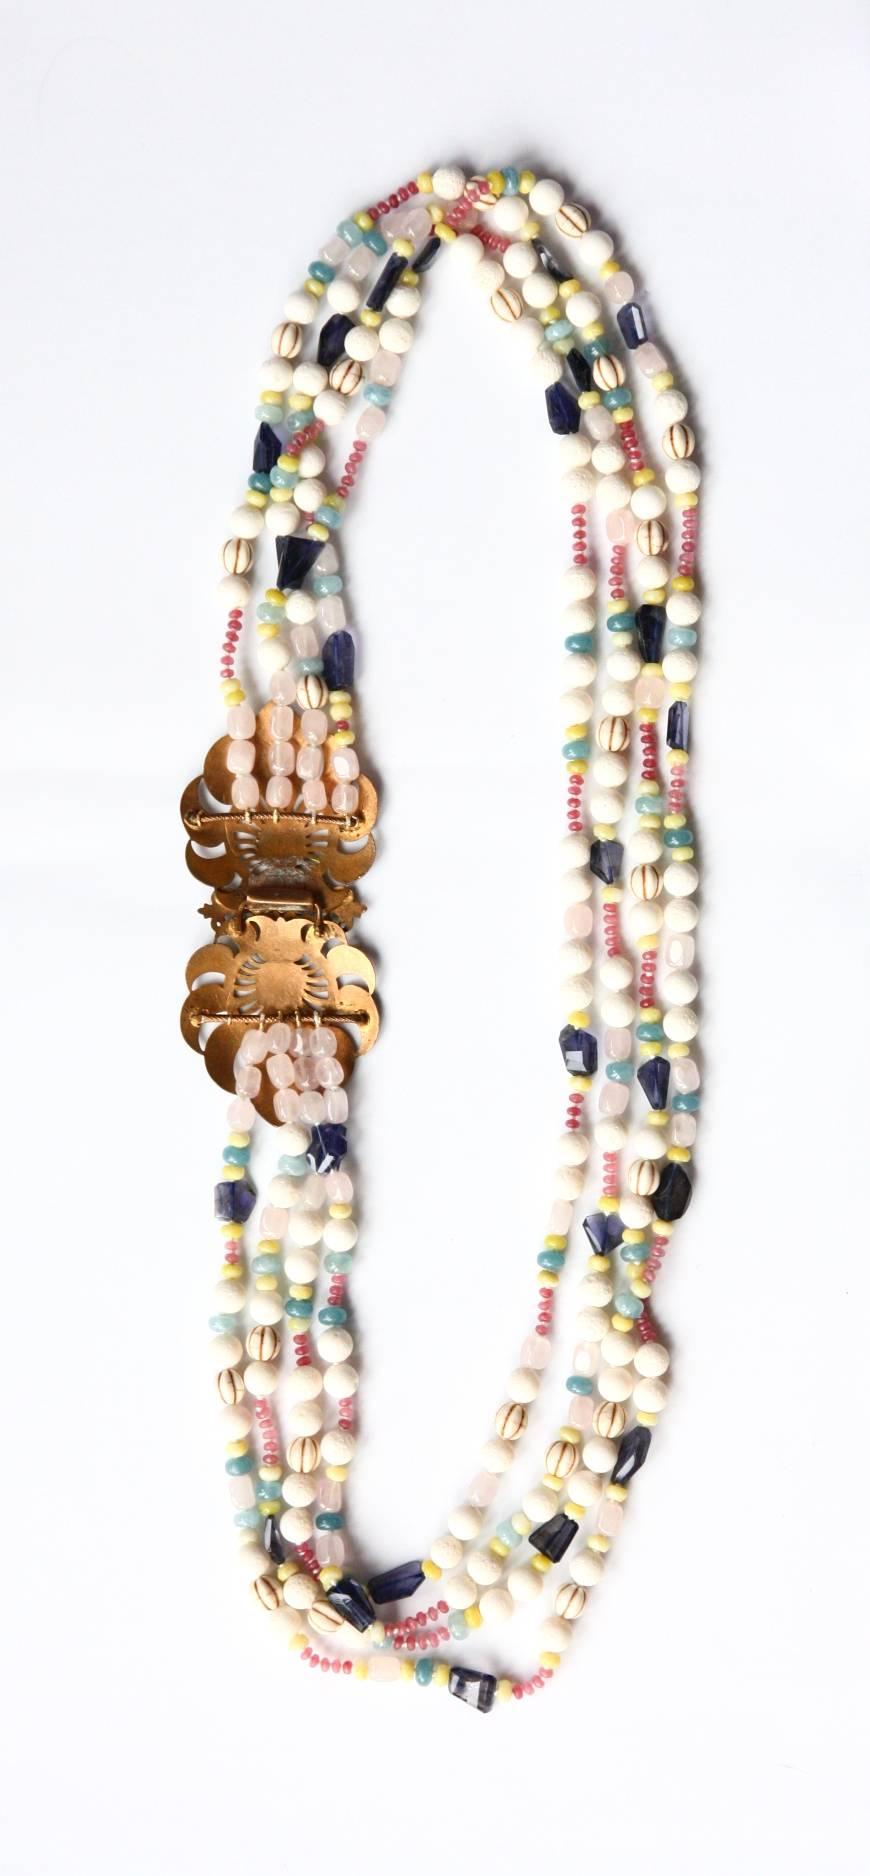 Very special long necklace with white coral madrepora, rose quartz, rhodochrosite, cianite, aquamarine bead mix. on the side beautiful antiques Uzbekistan buckle enamel and bronze. Total length 104cm max.
All Giulia Colussi jewelry is new and has